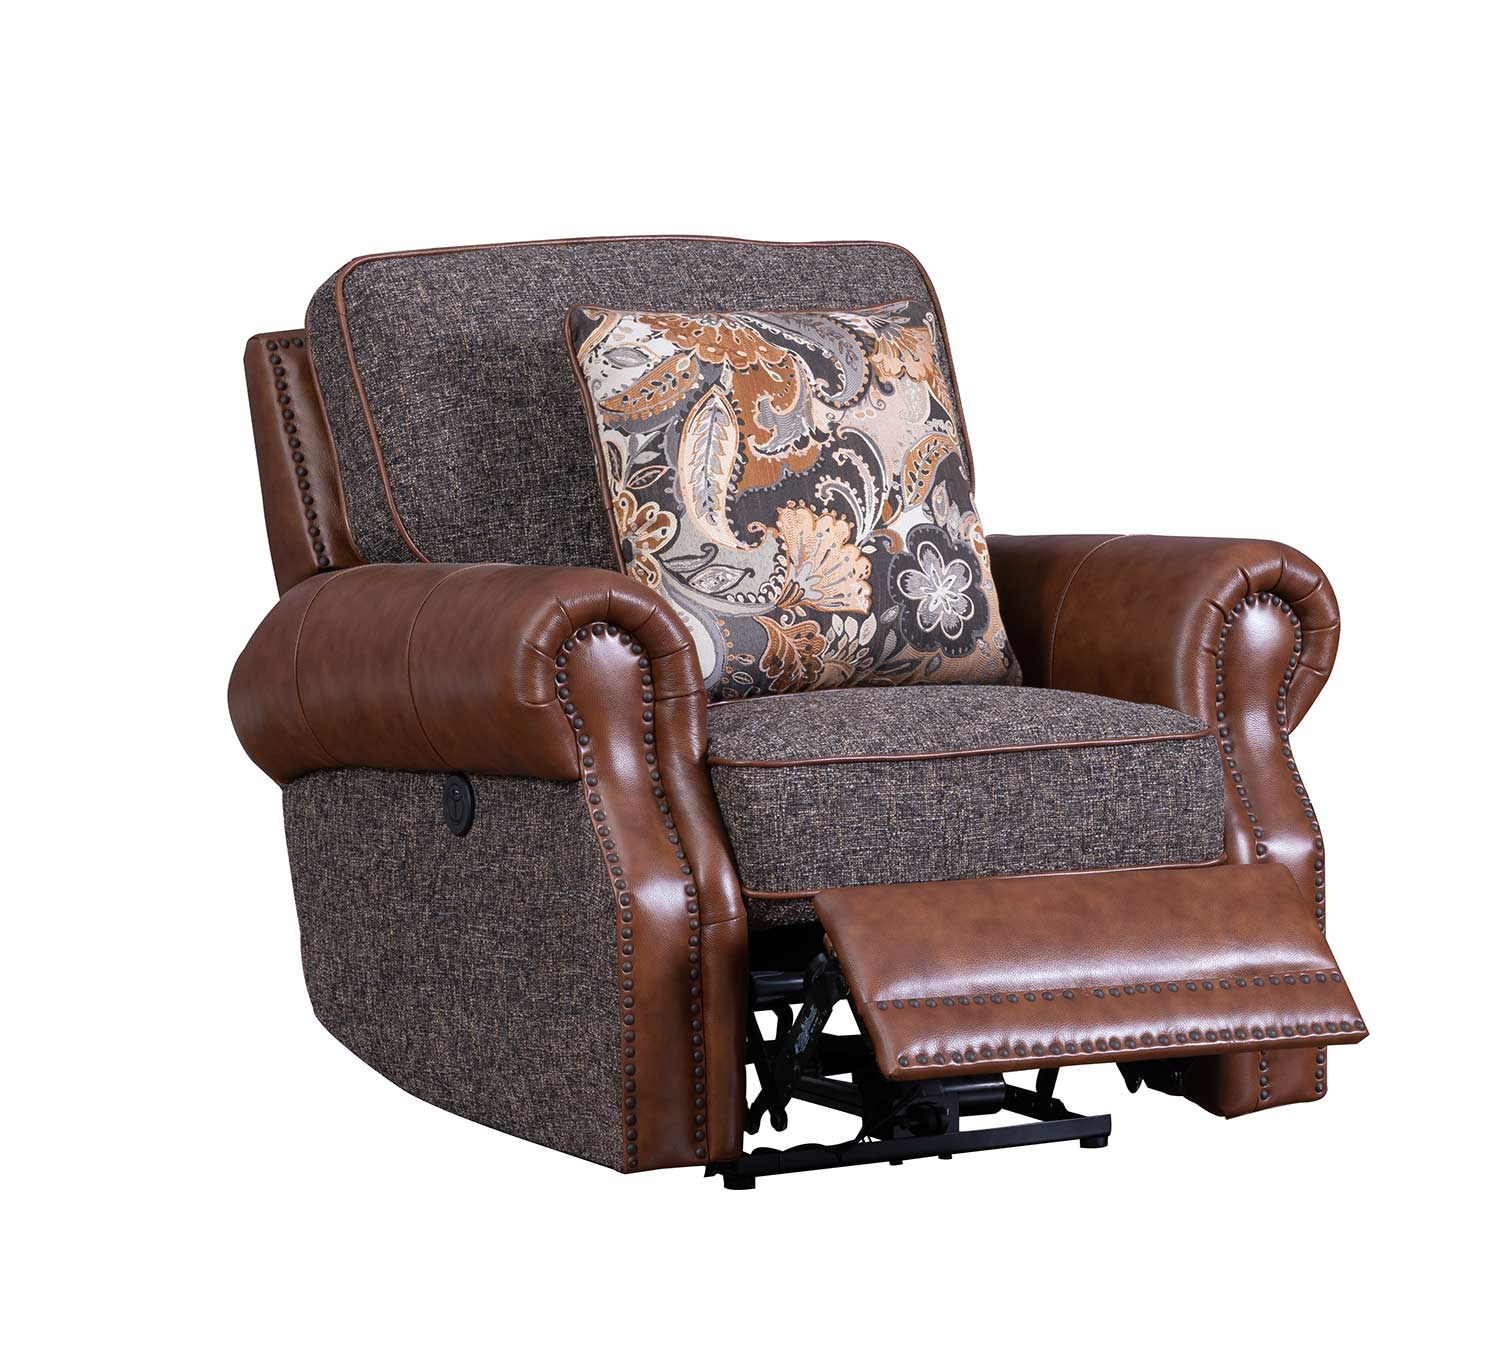 Barcalounger Jefferson Power Recliner Chair - Ryegate Tawny all leather/Eddystone Arabica fabric